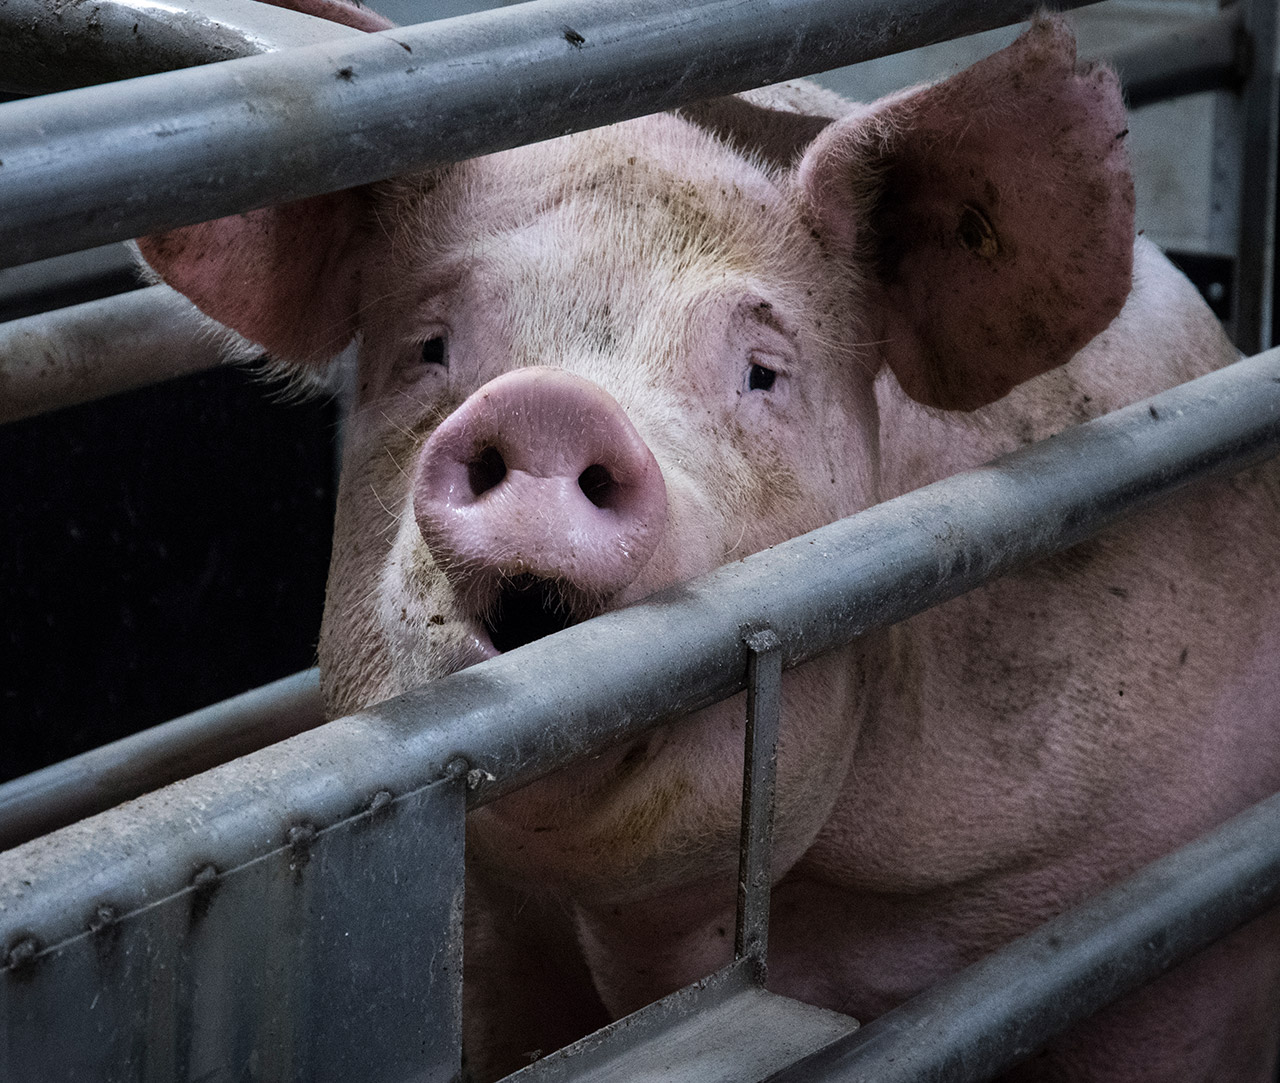 Caged Pig on UK Factory Farm